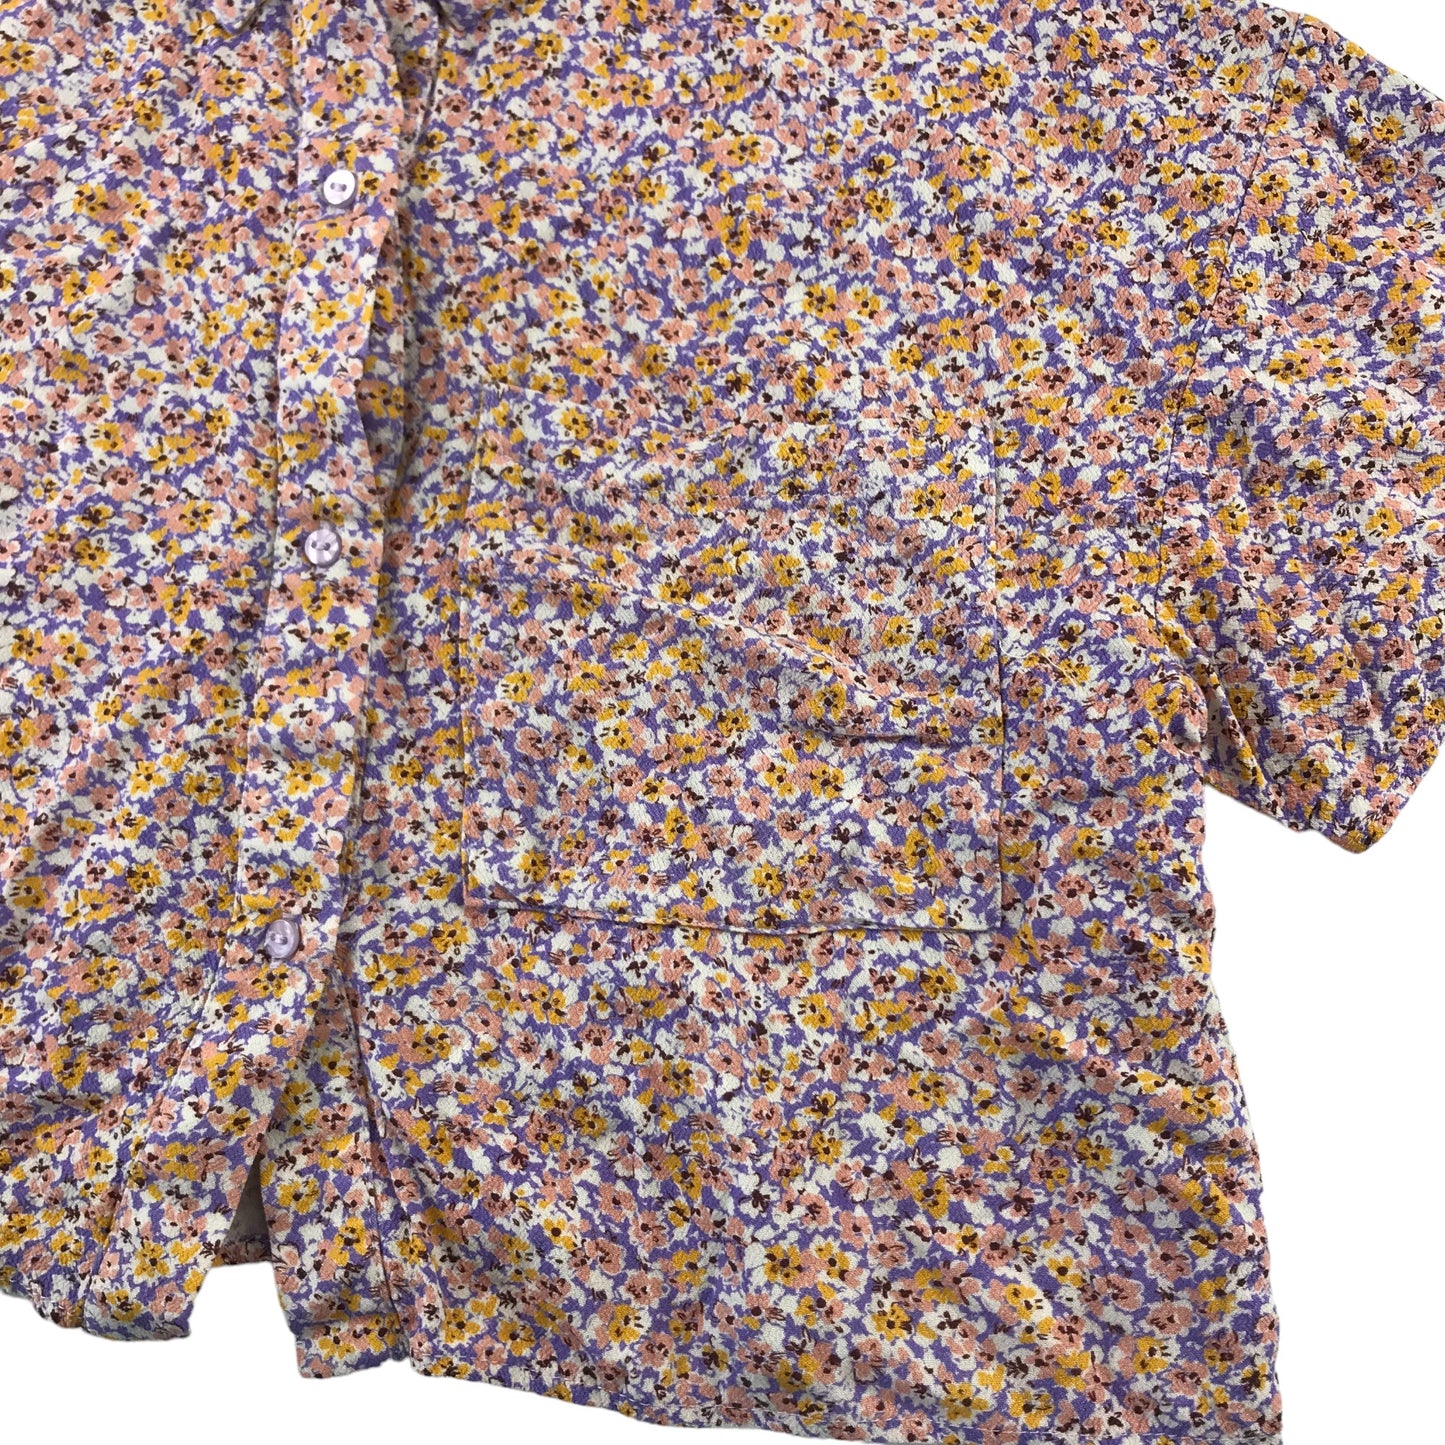 Zara blouse 13-14 years lilac and orange floral cropped button up